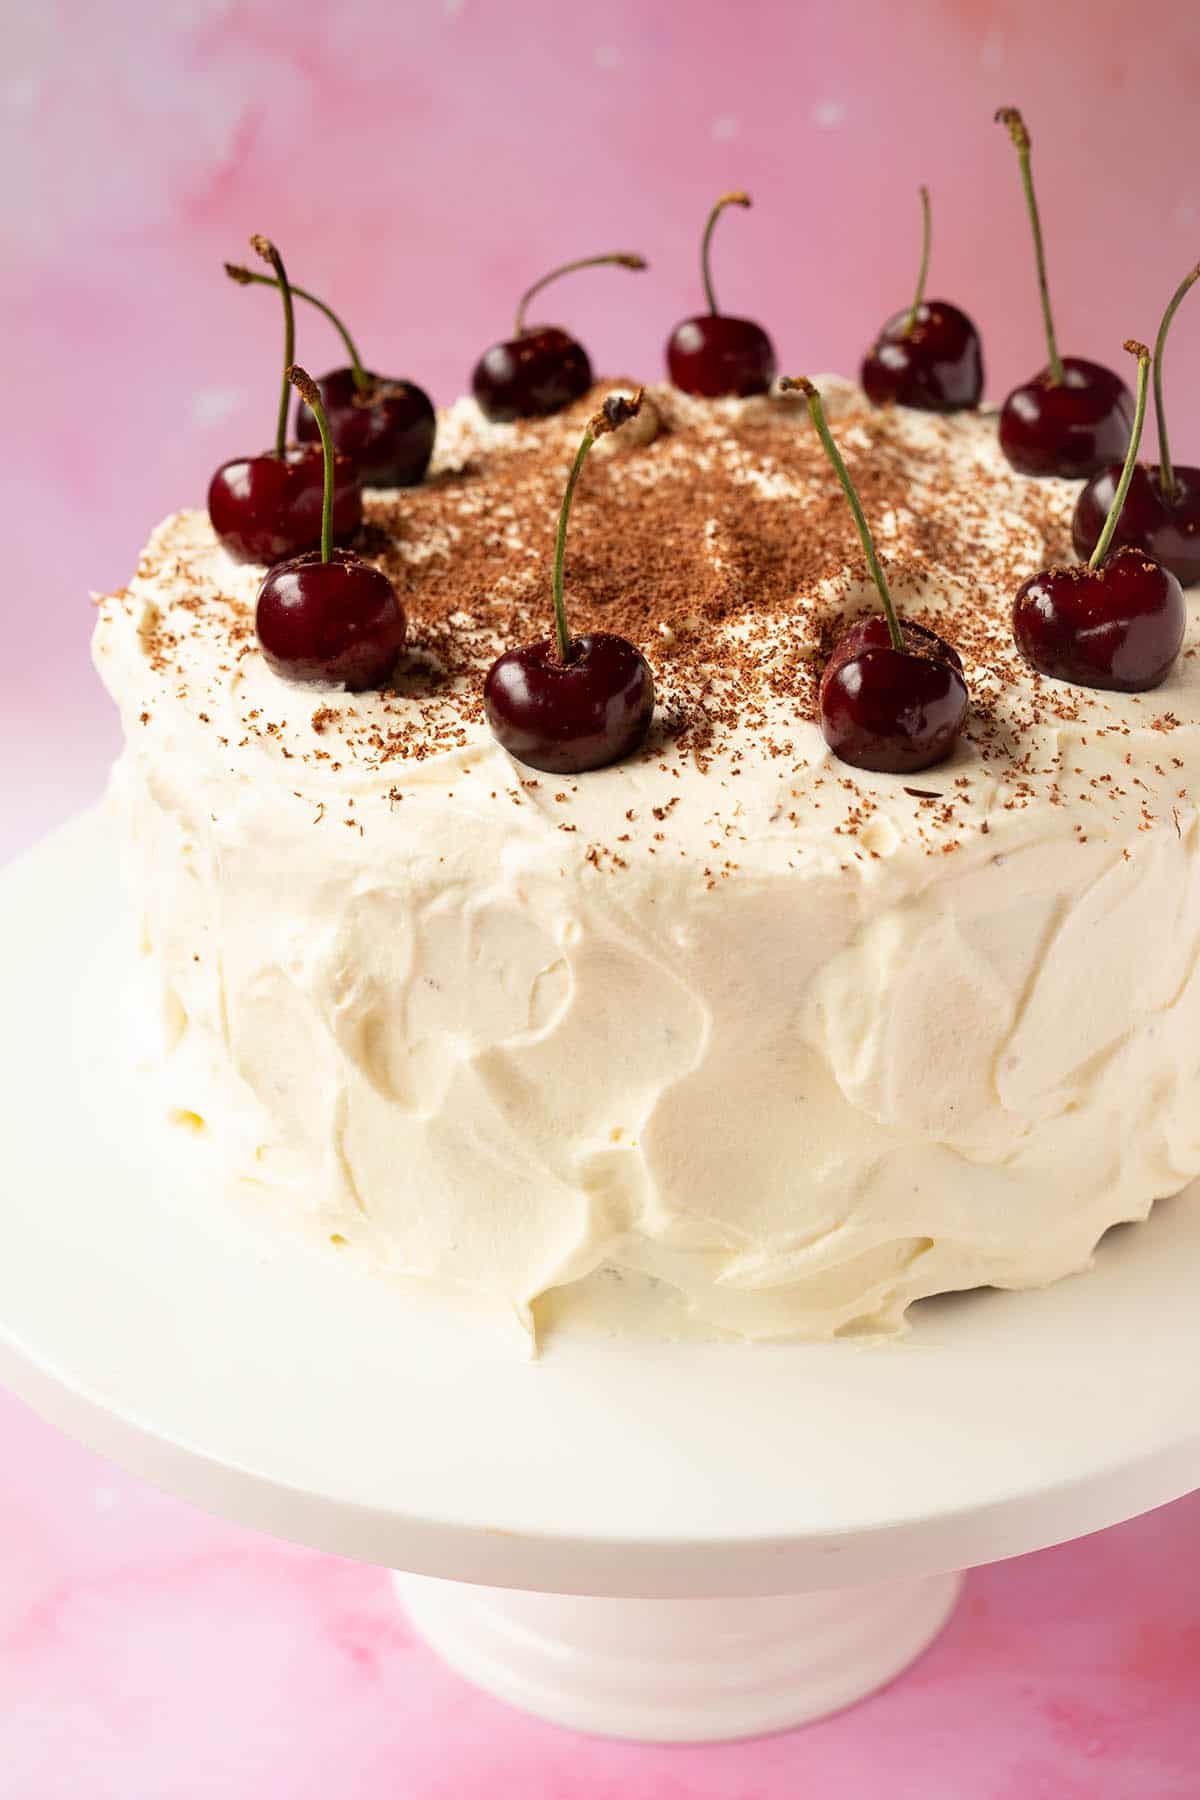 A beautiful Black Forest Cake decorated with fresh cherries on a white cake stand.